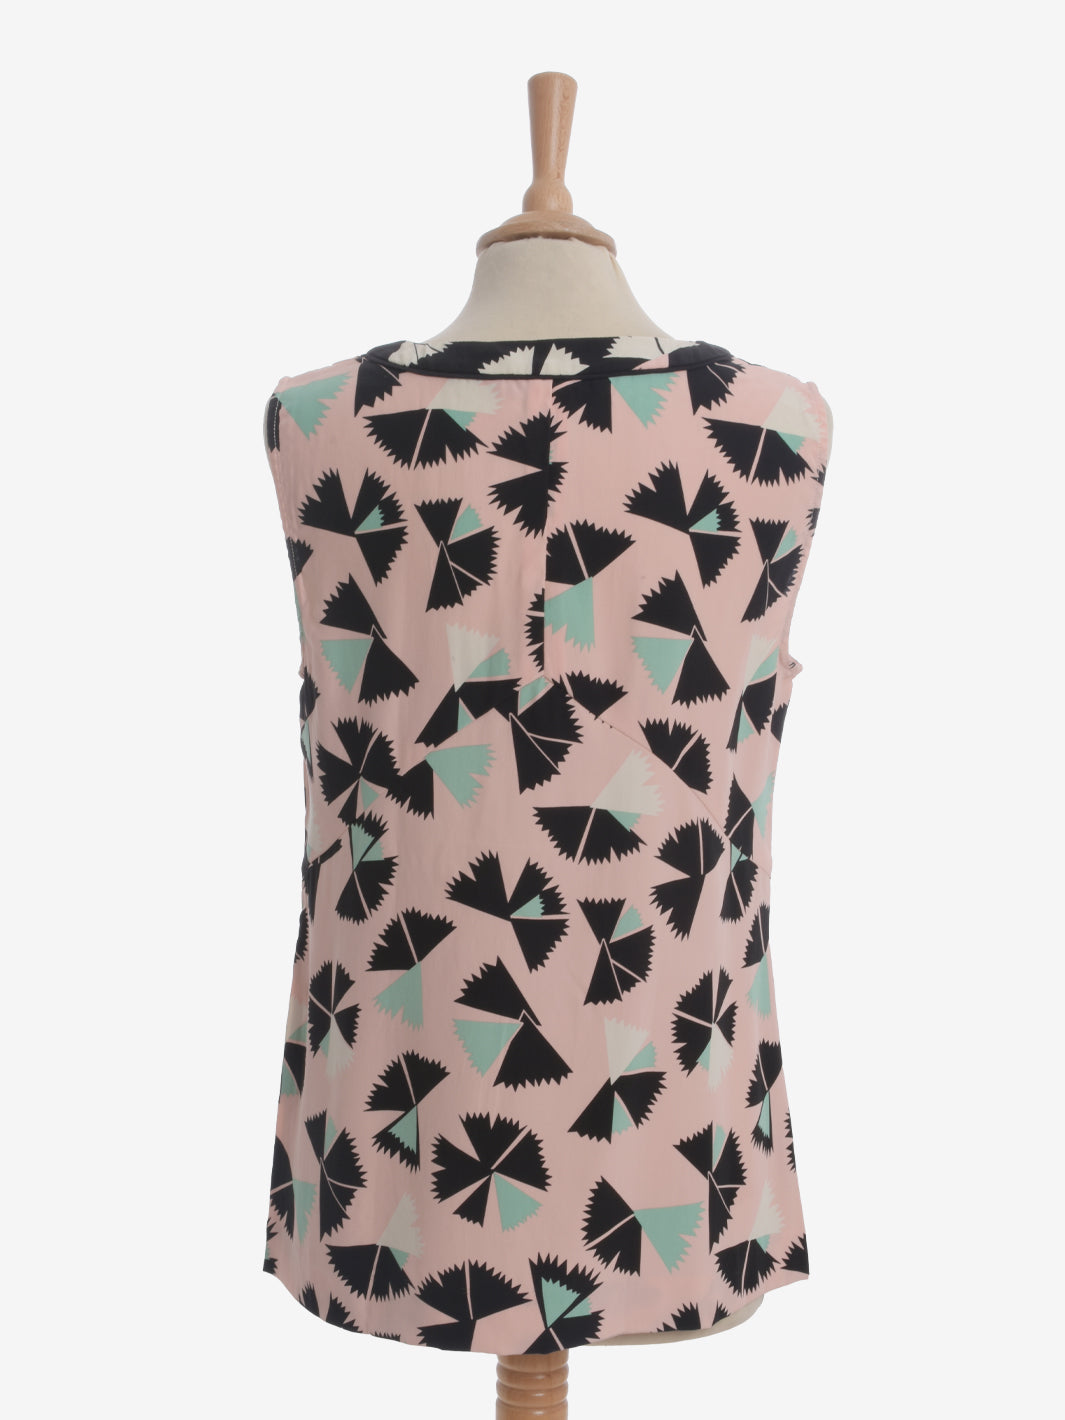 Marc By Marc Jacobs Patterned Top